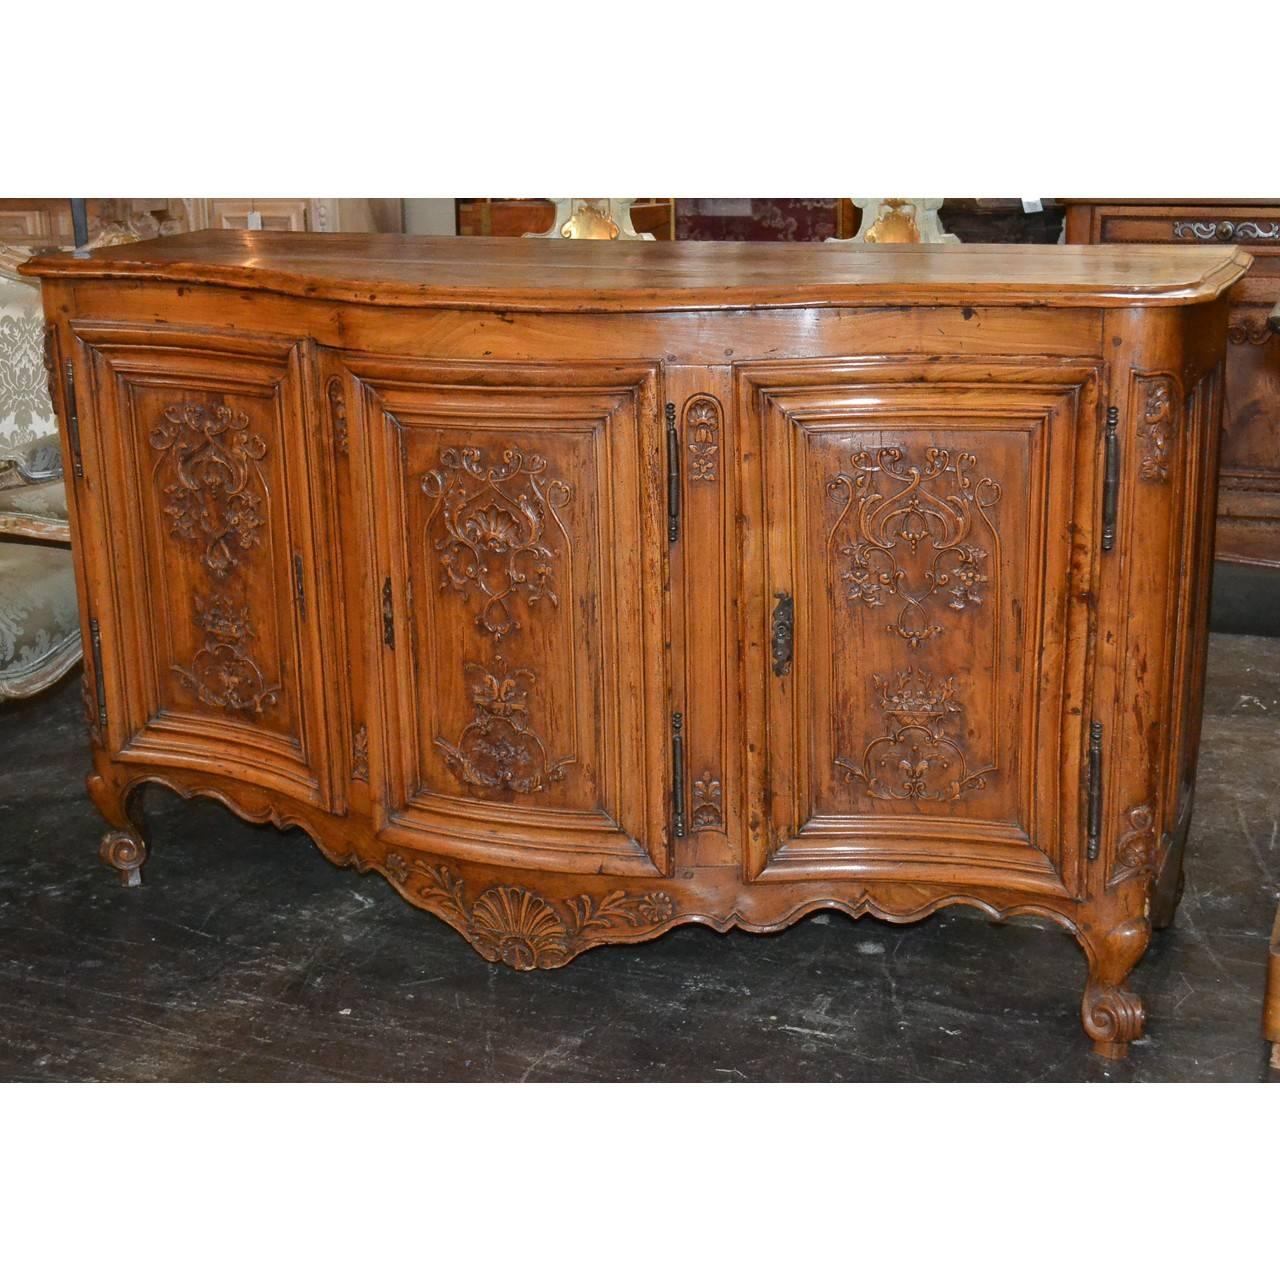 Hand-Crafted 18th Century French Buffet from Provence